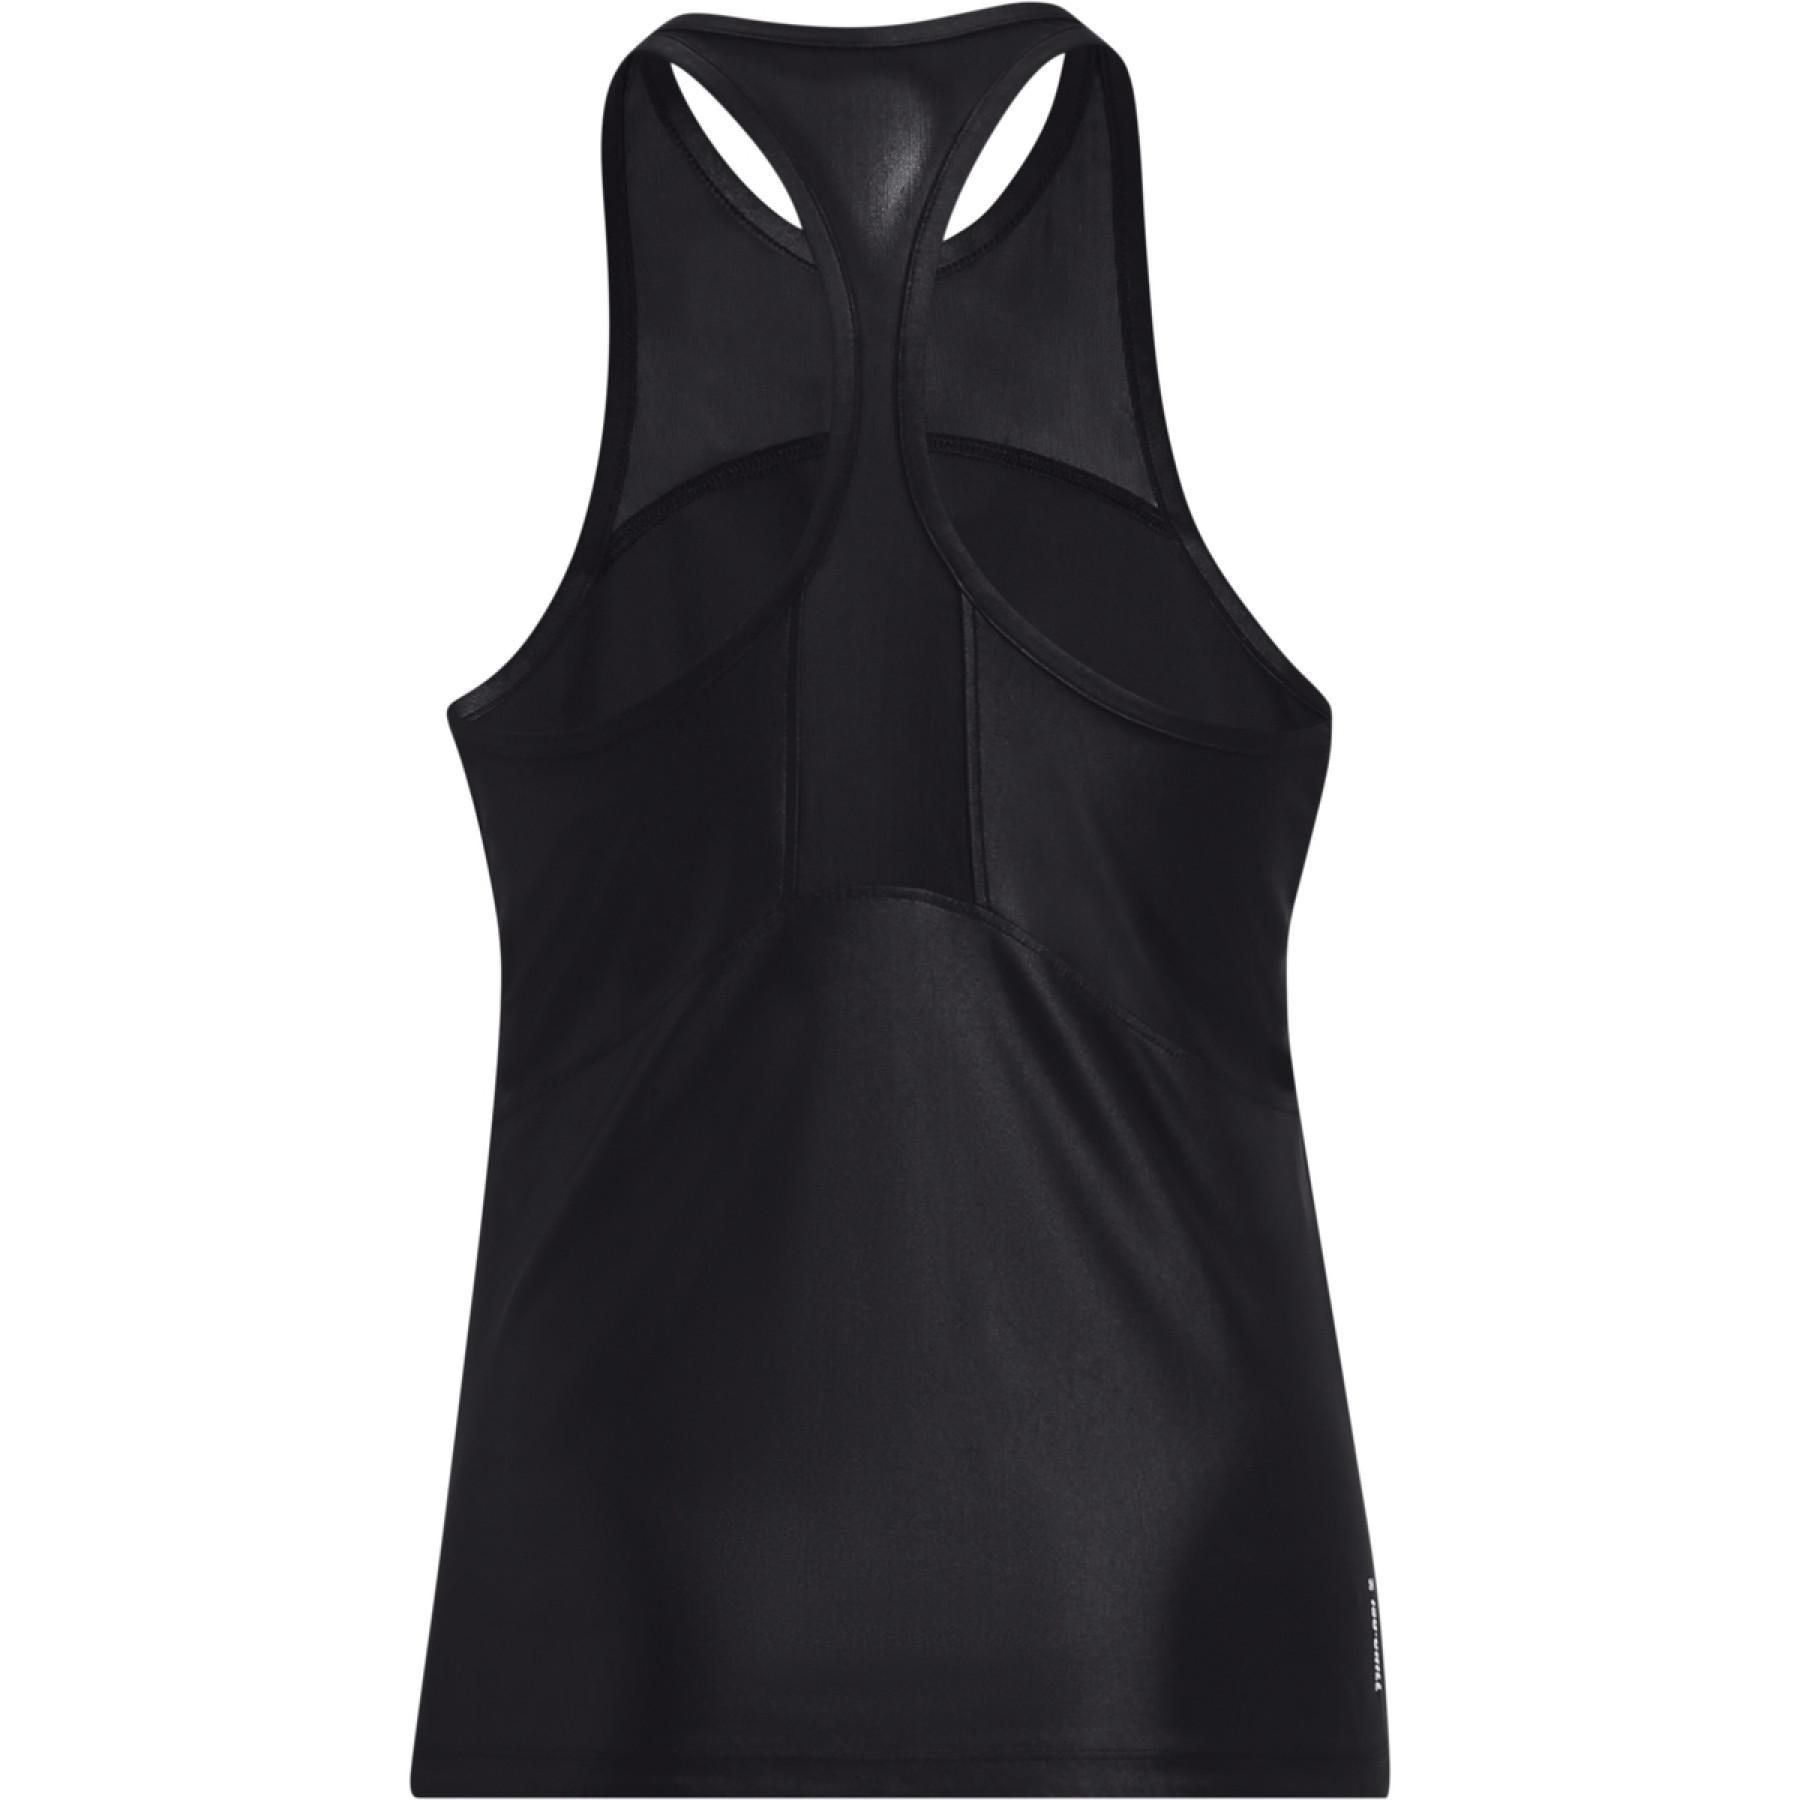 Damski tank top Under Armour iso-chill